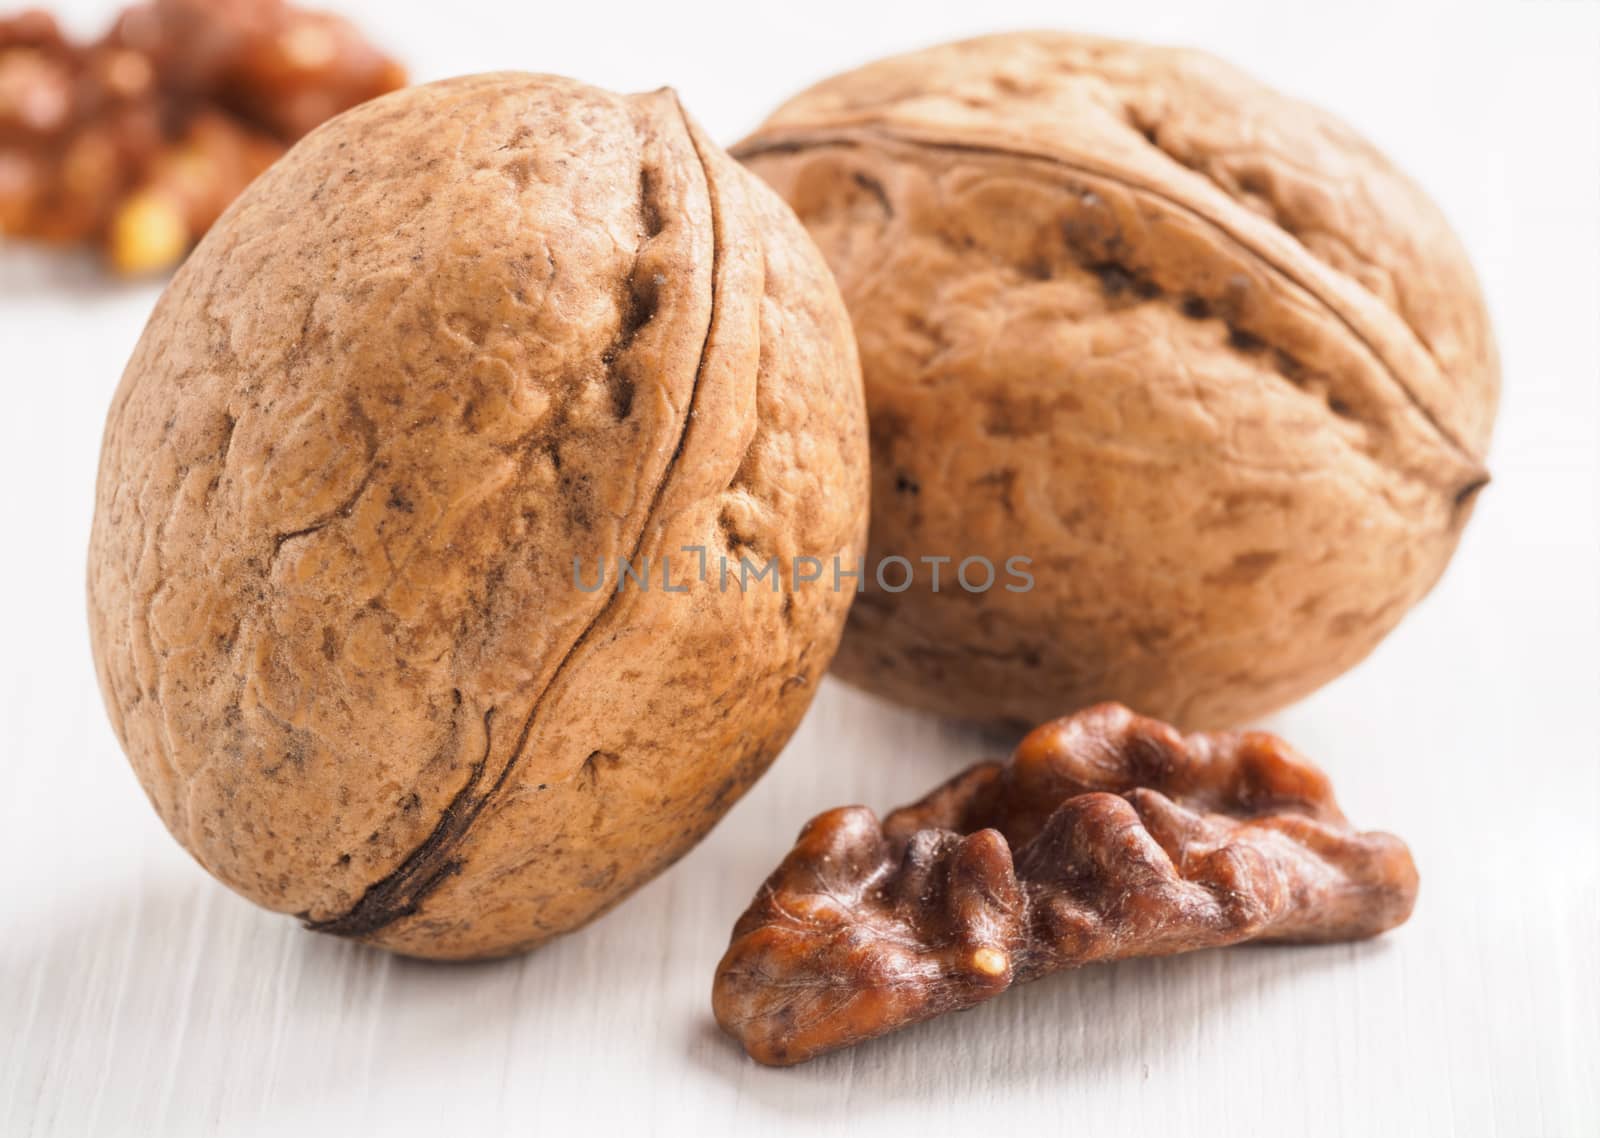 Close up view on inshell walnut on white wooden background